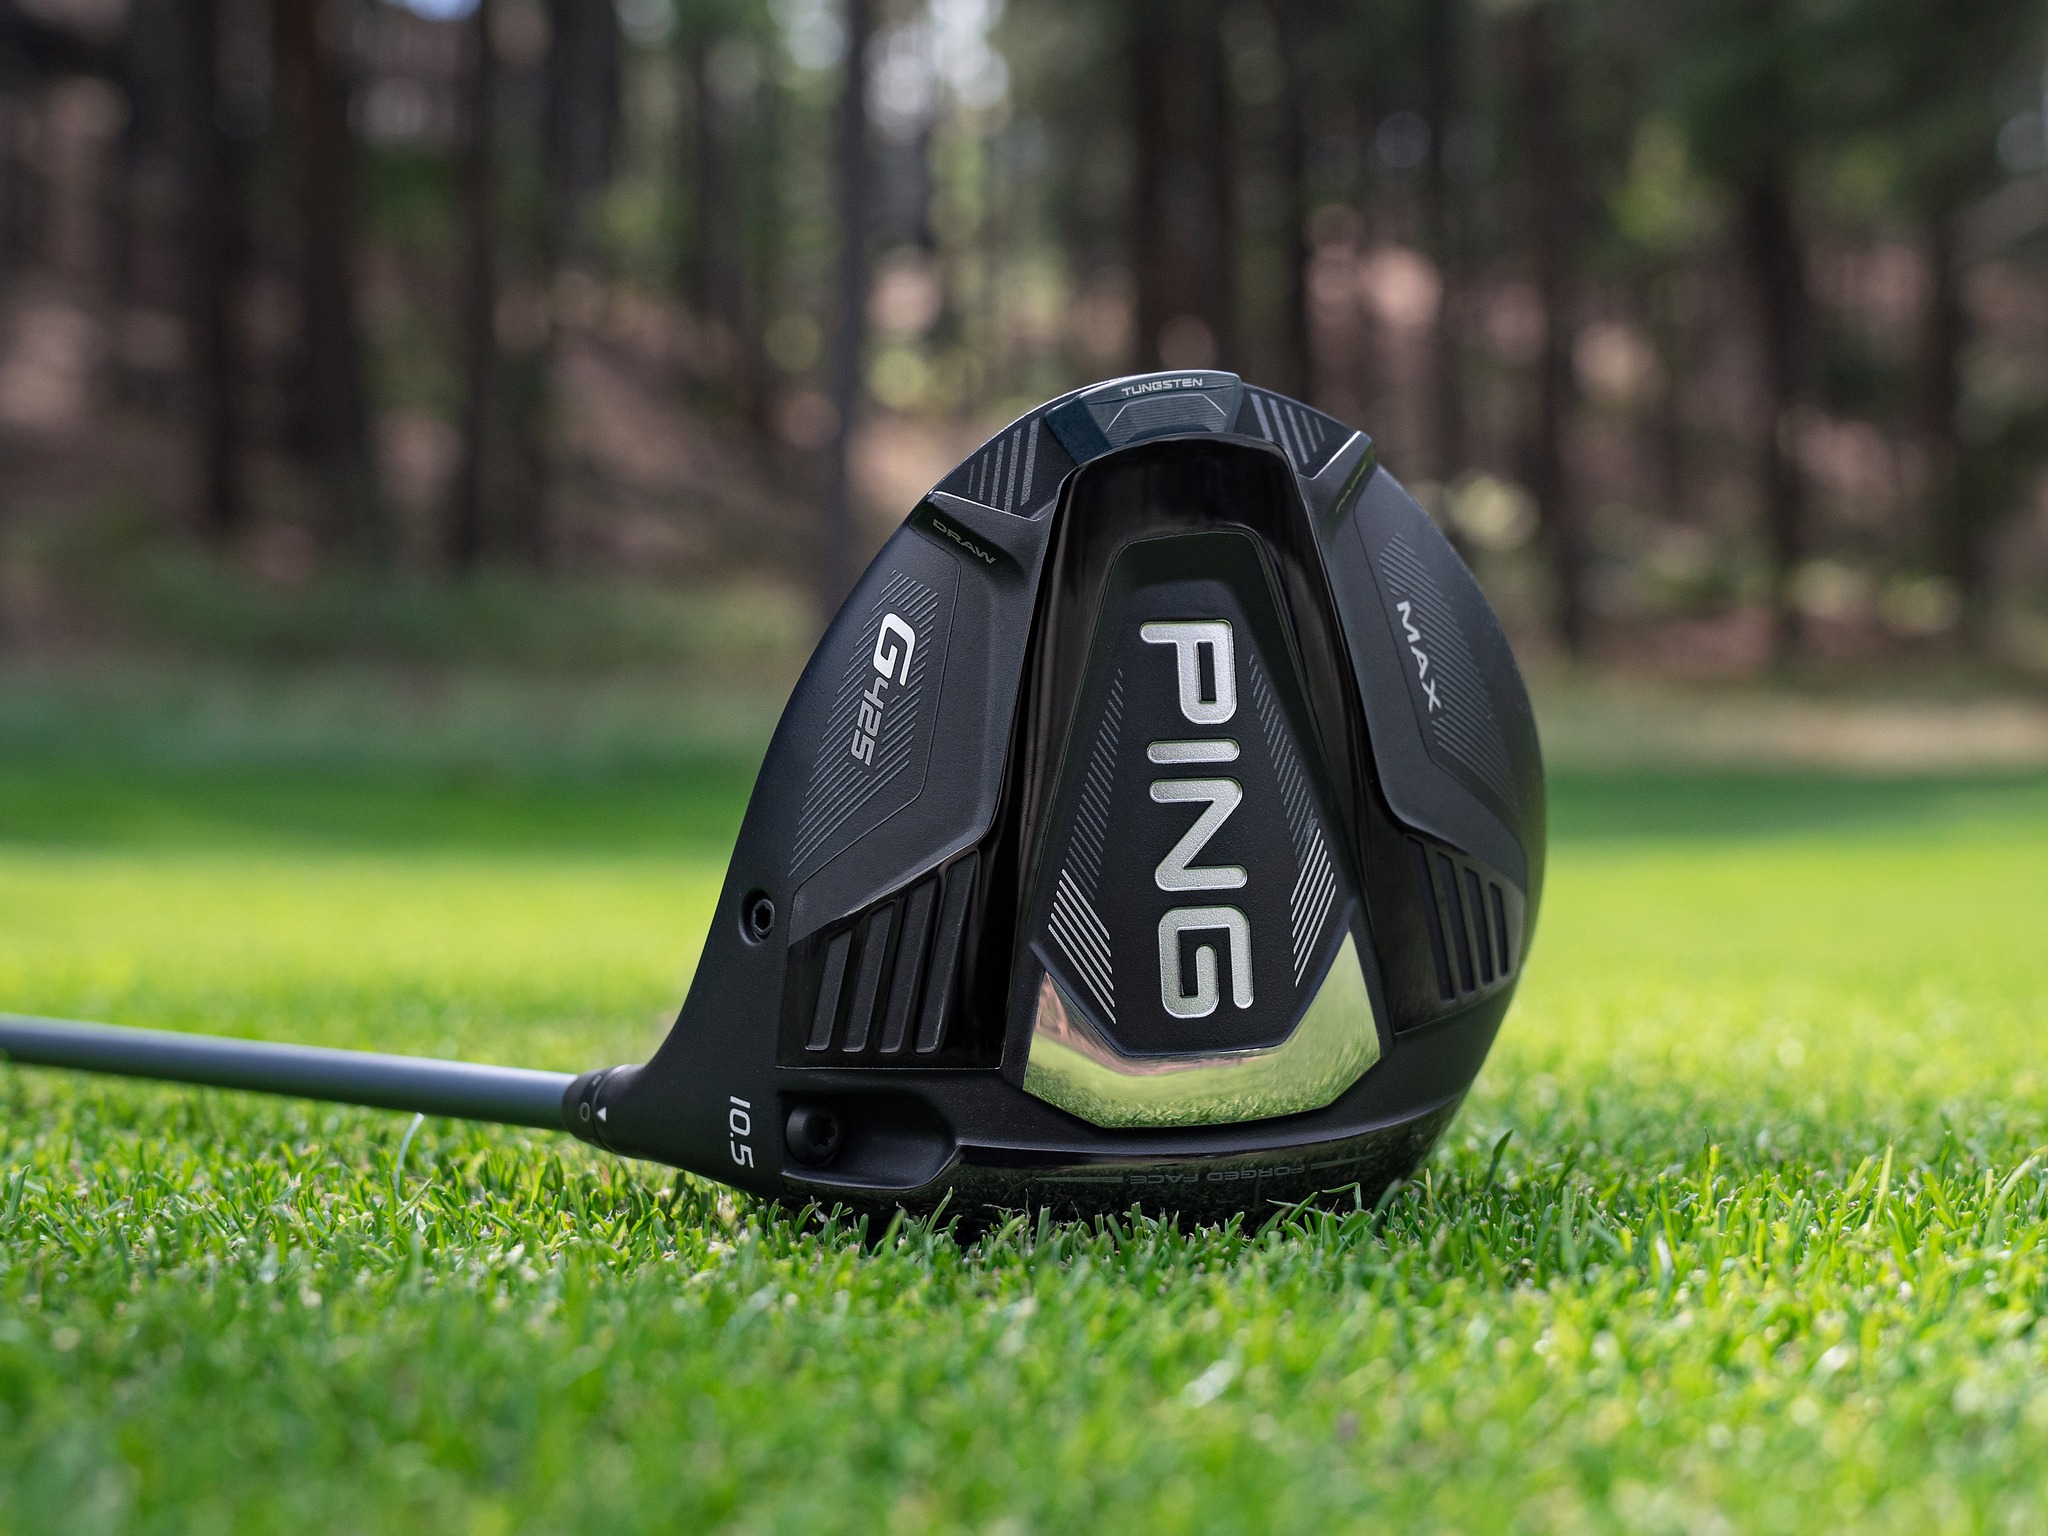 G425 MAX: MyGolfSpy’s “MOST WANTED DRIVER”